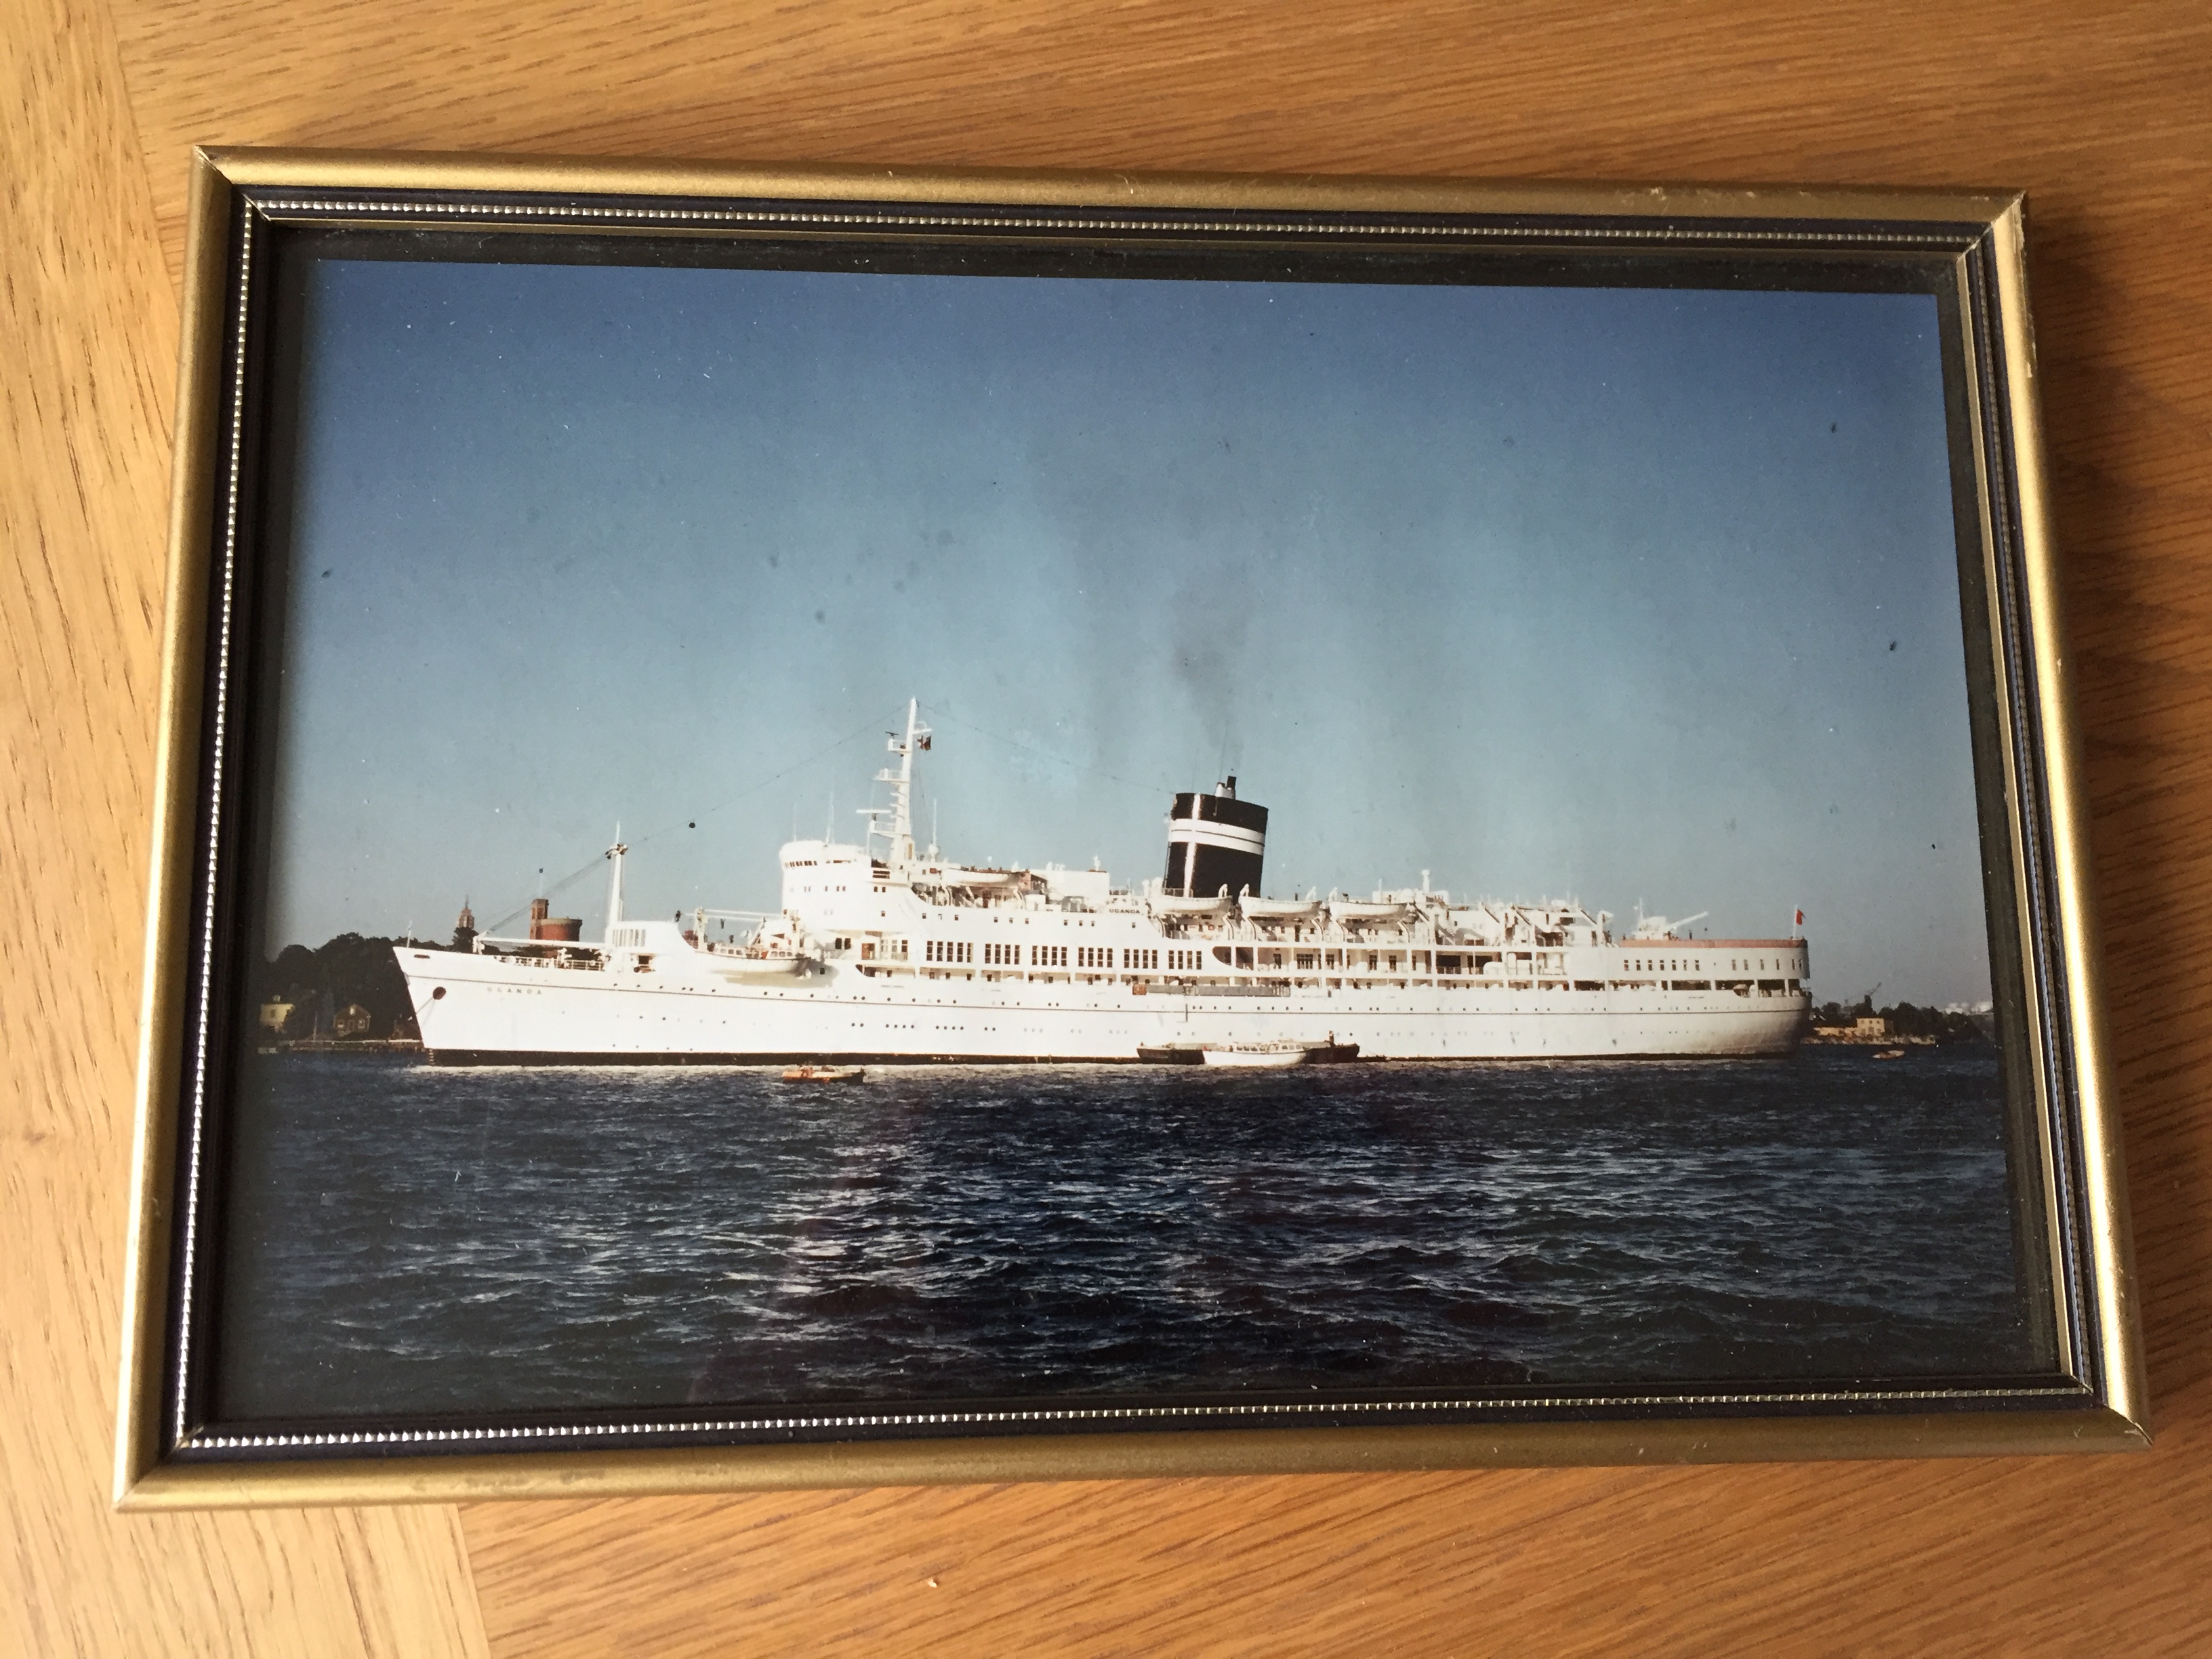 EARLY FRAMED PICTURE OF THE BRITISH INDIA STEAM NAVIGATION COMPANY LINE VESSEL THE SS UGANDA 1947-1983